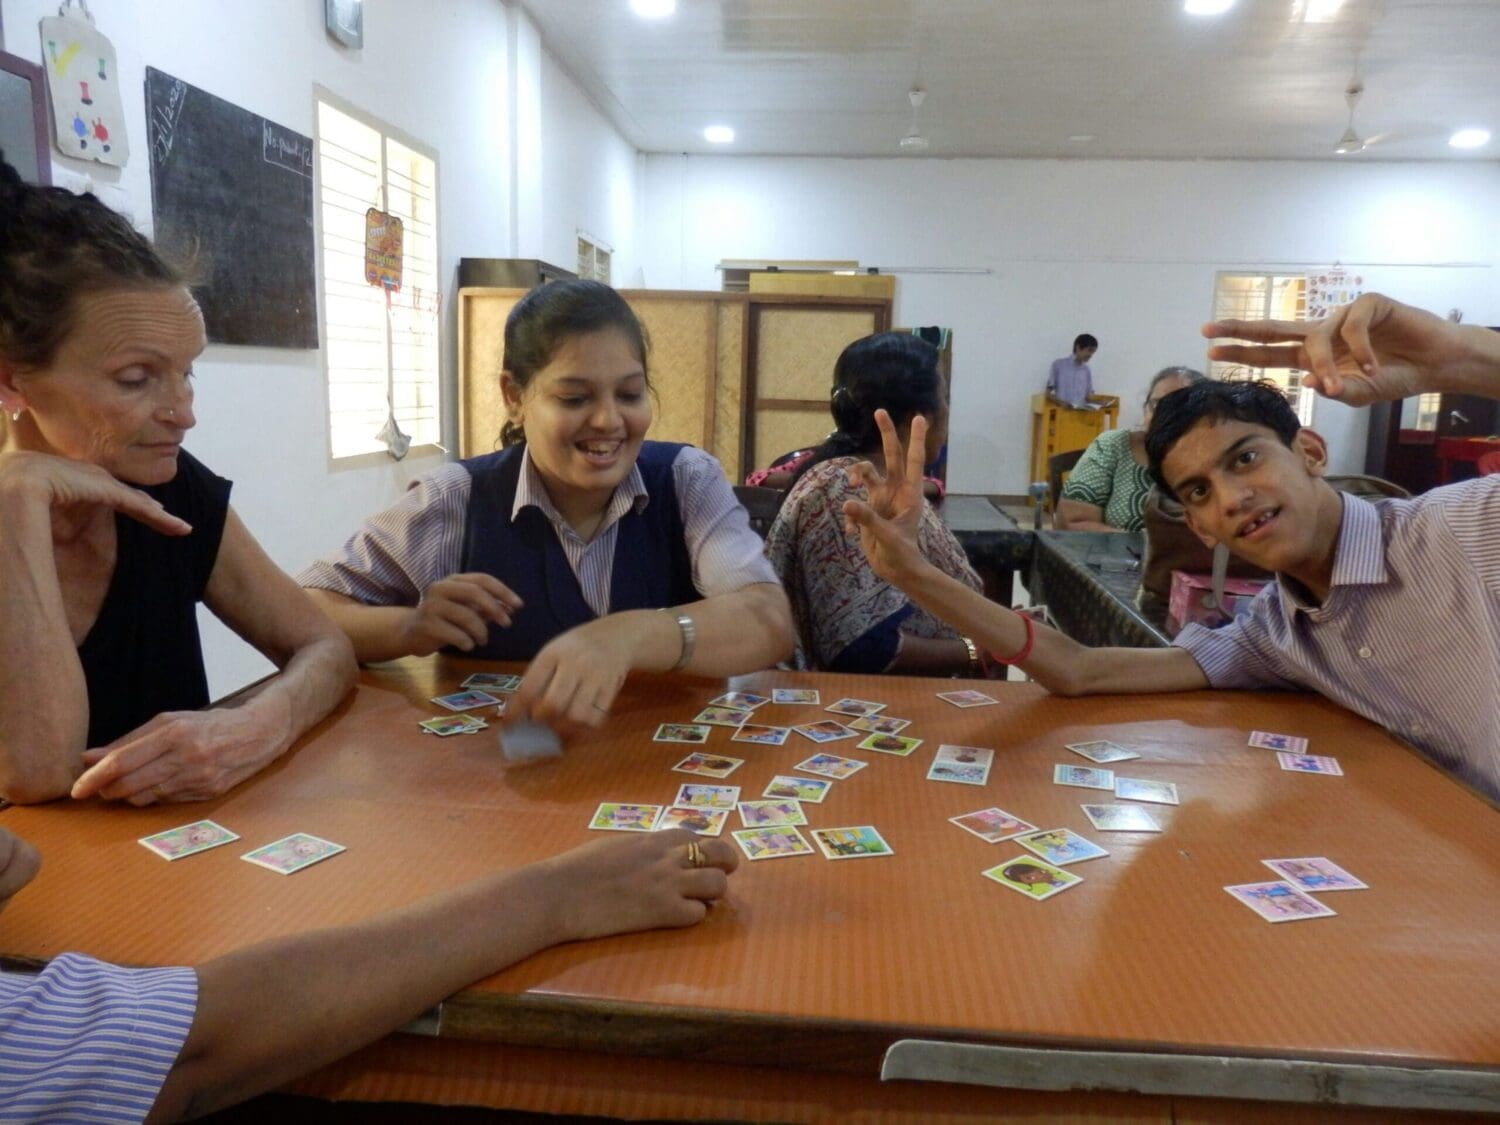 Activity time with children in India